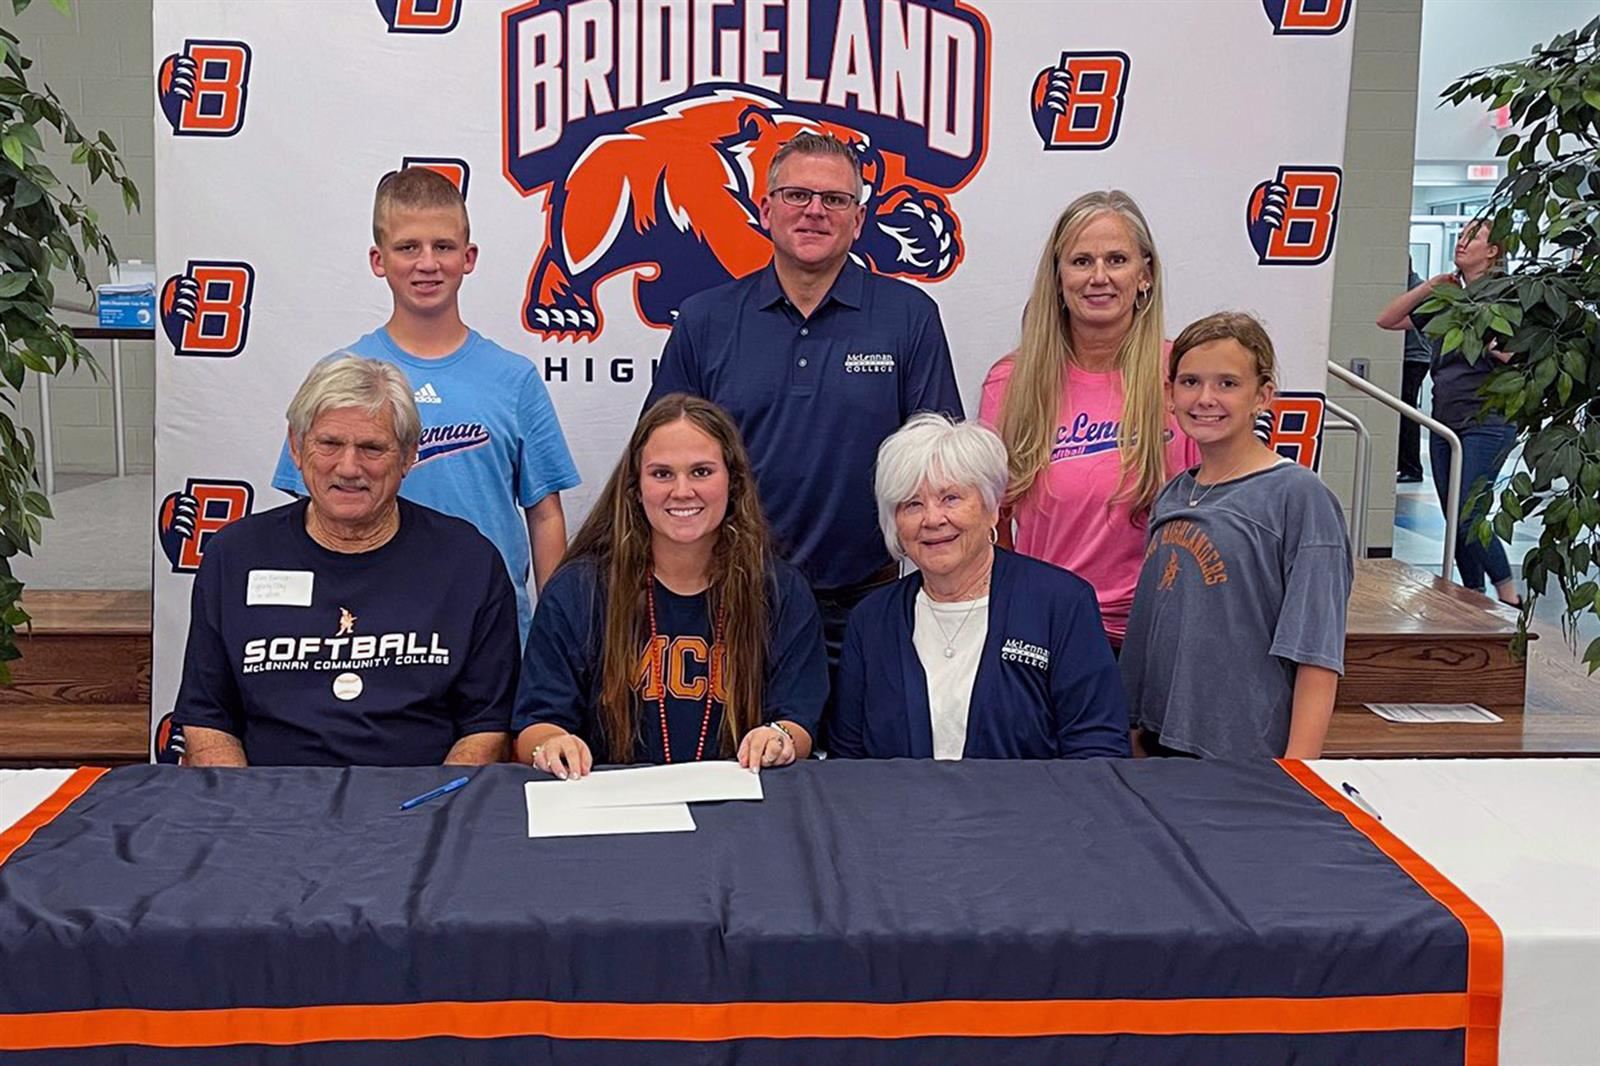 Bridgeland High School senior Makenzi Jenkins, seated second from left, signed a letter of intent to play softball.